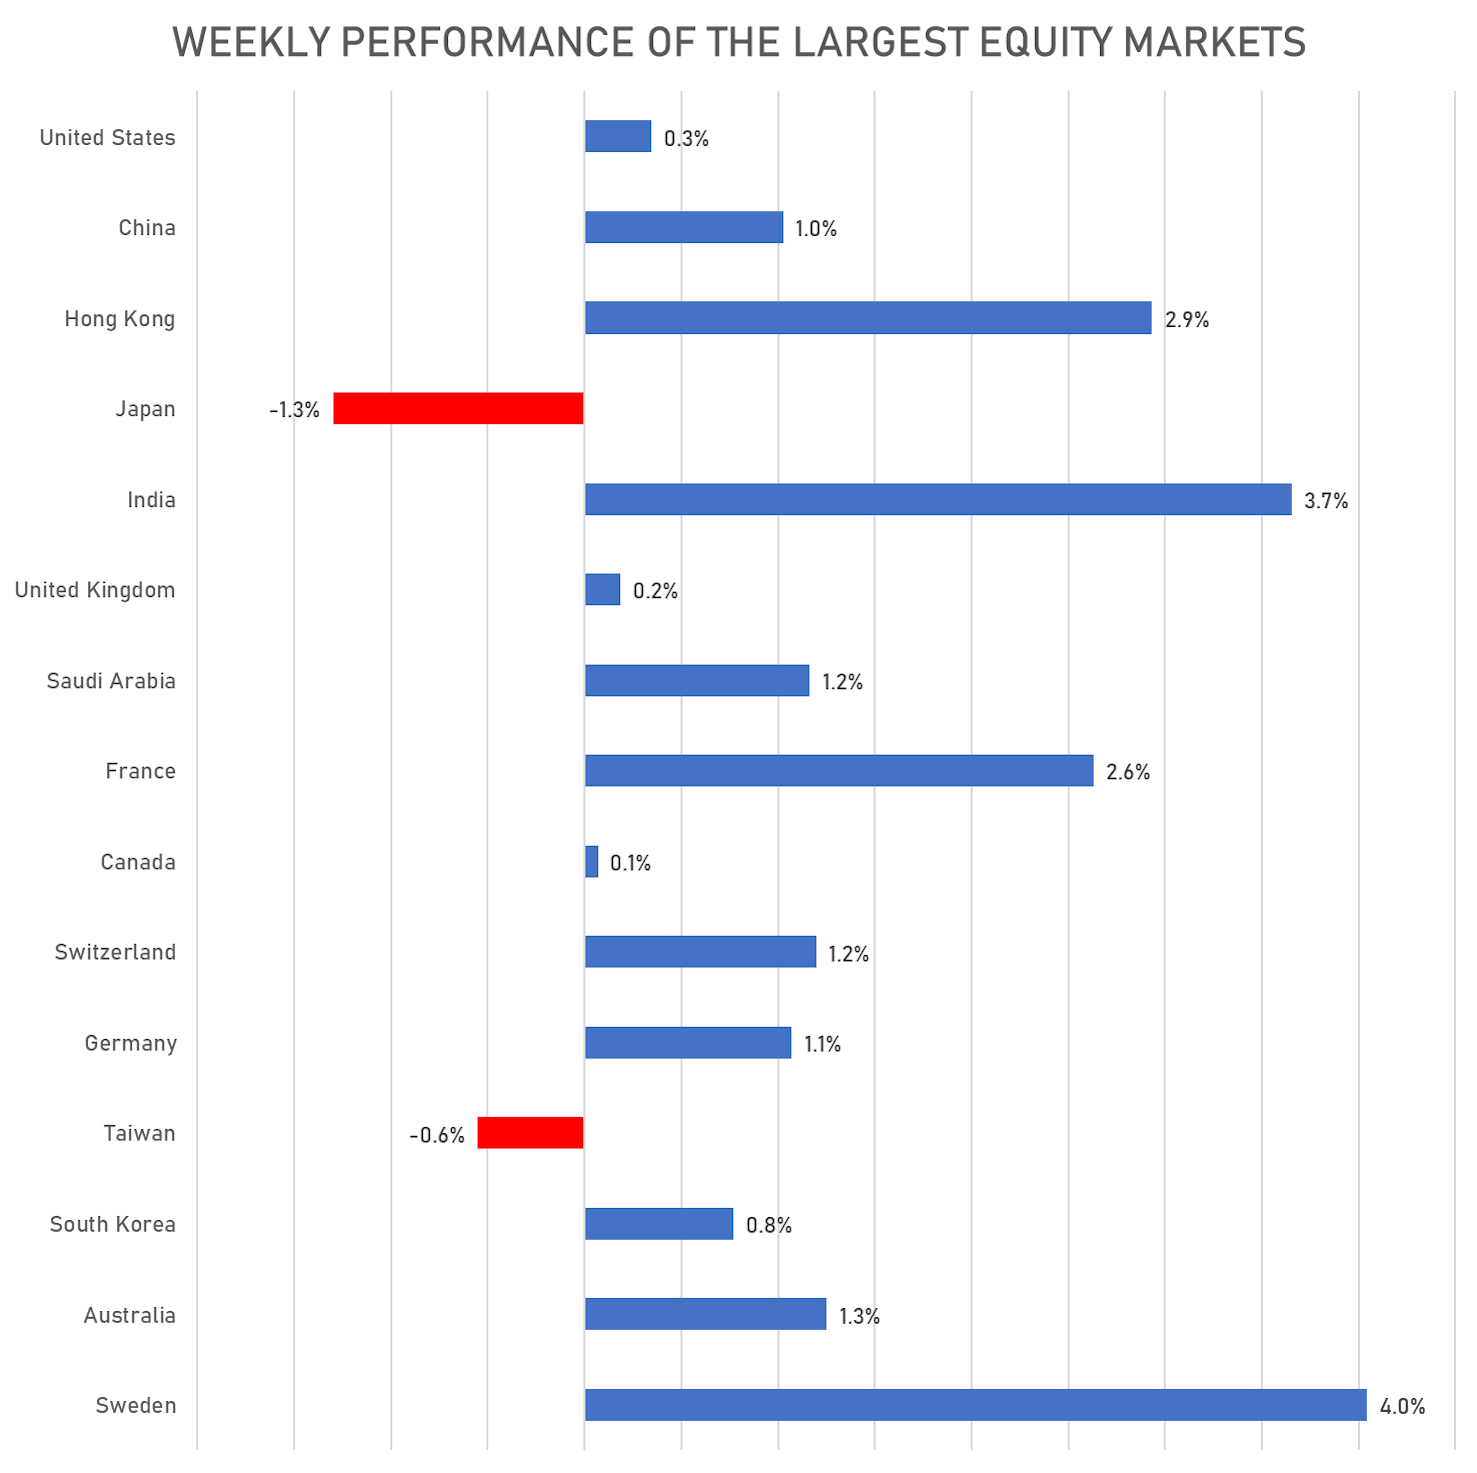 Weekly Performance OF the Largest Equity Markets | Sources: phipost.com, FactSet data